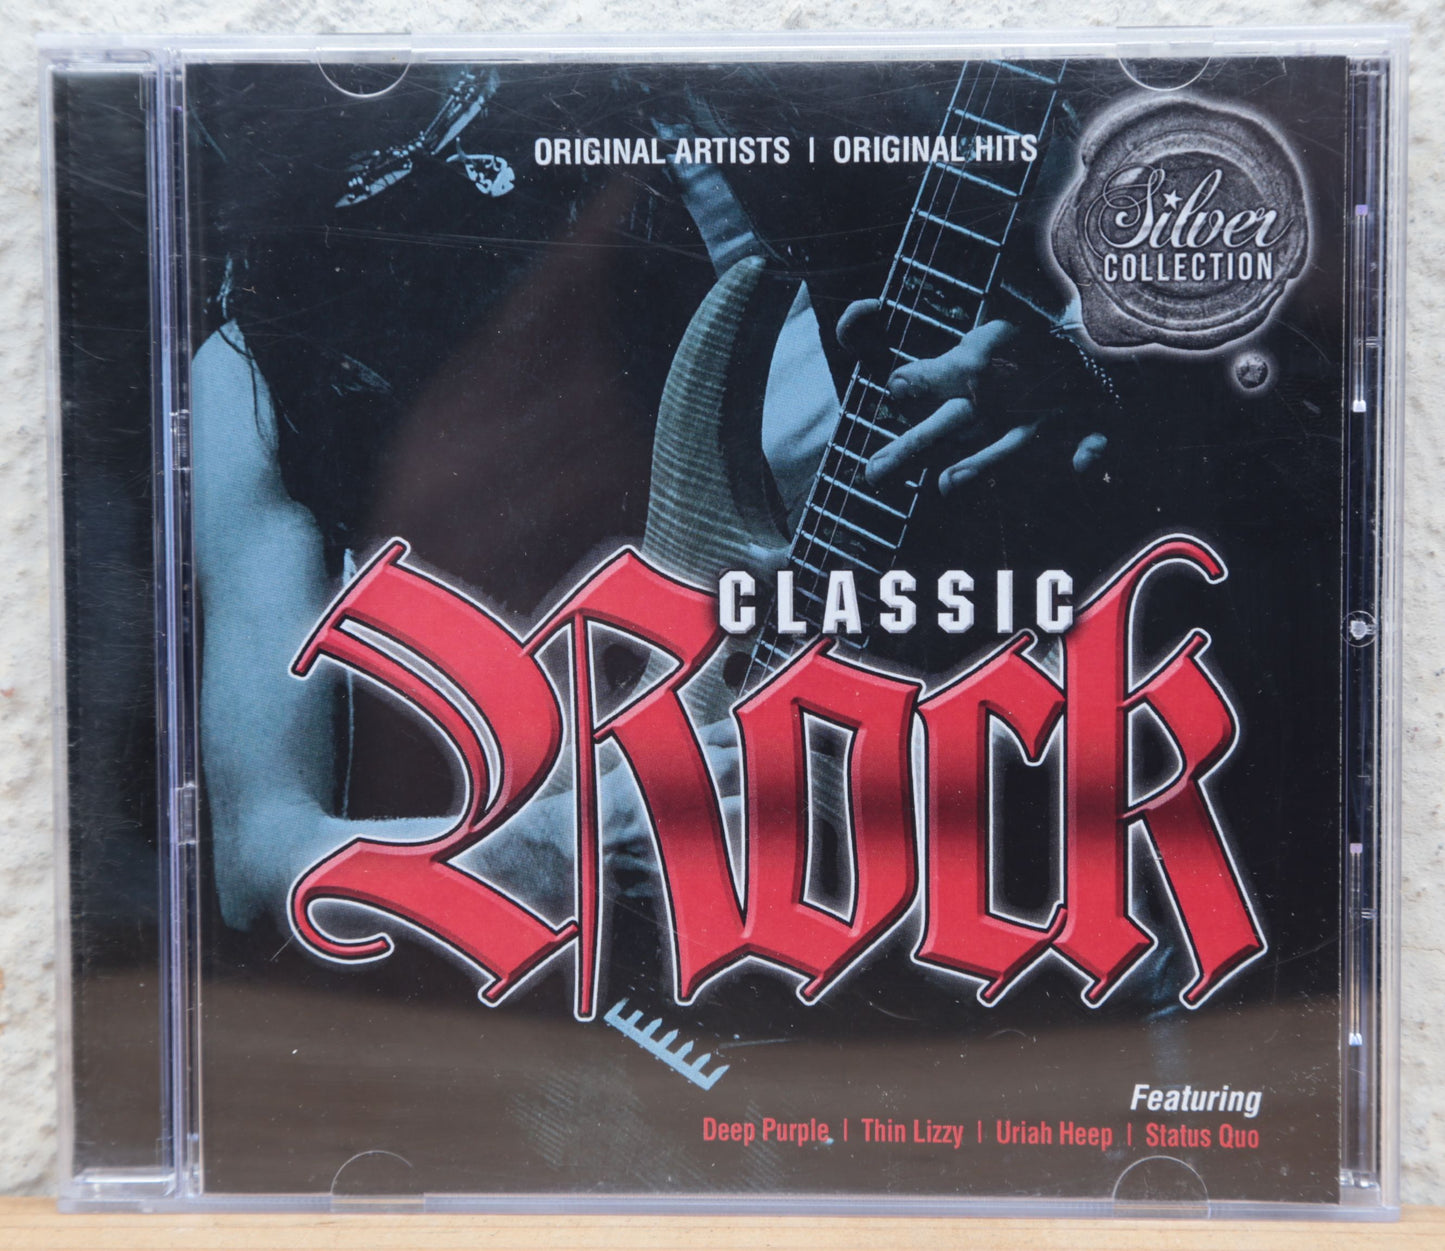 Classic Rock (Silver Collection) cd